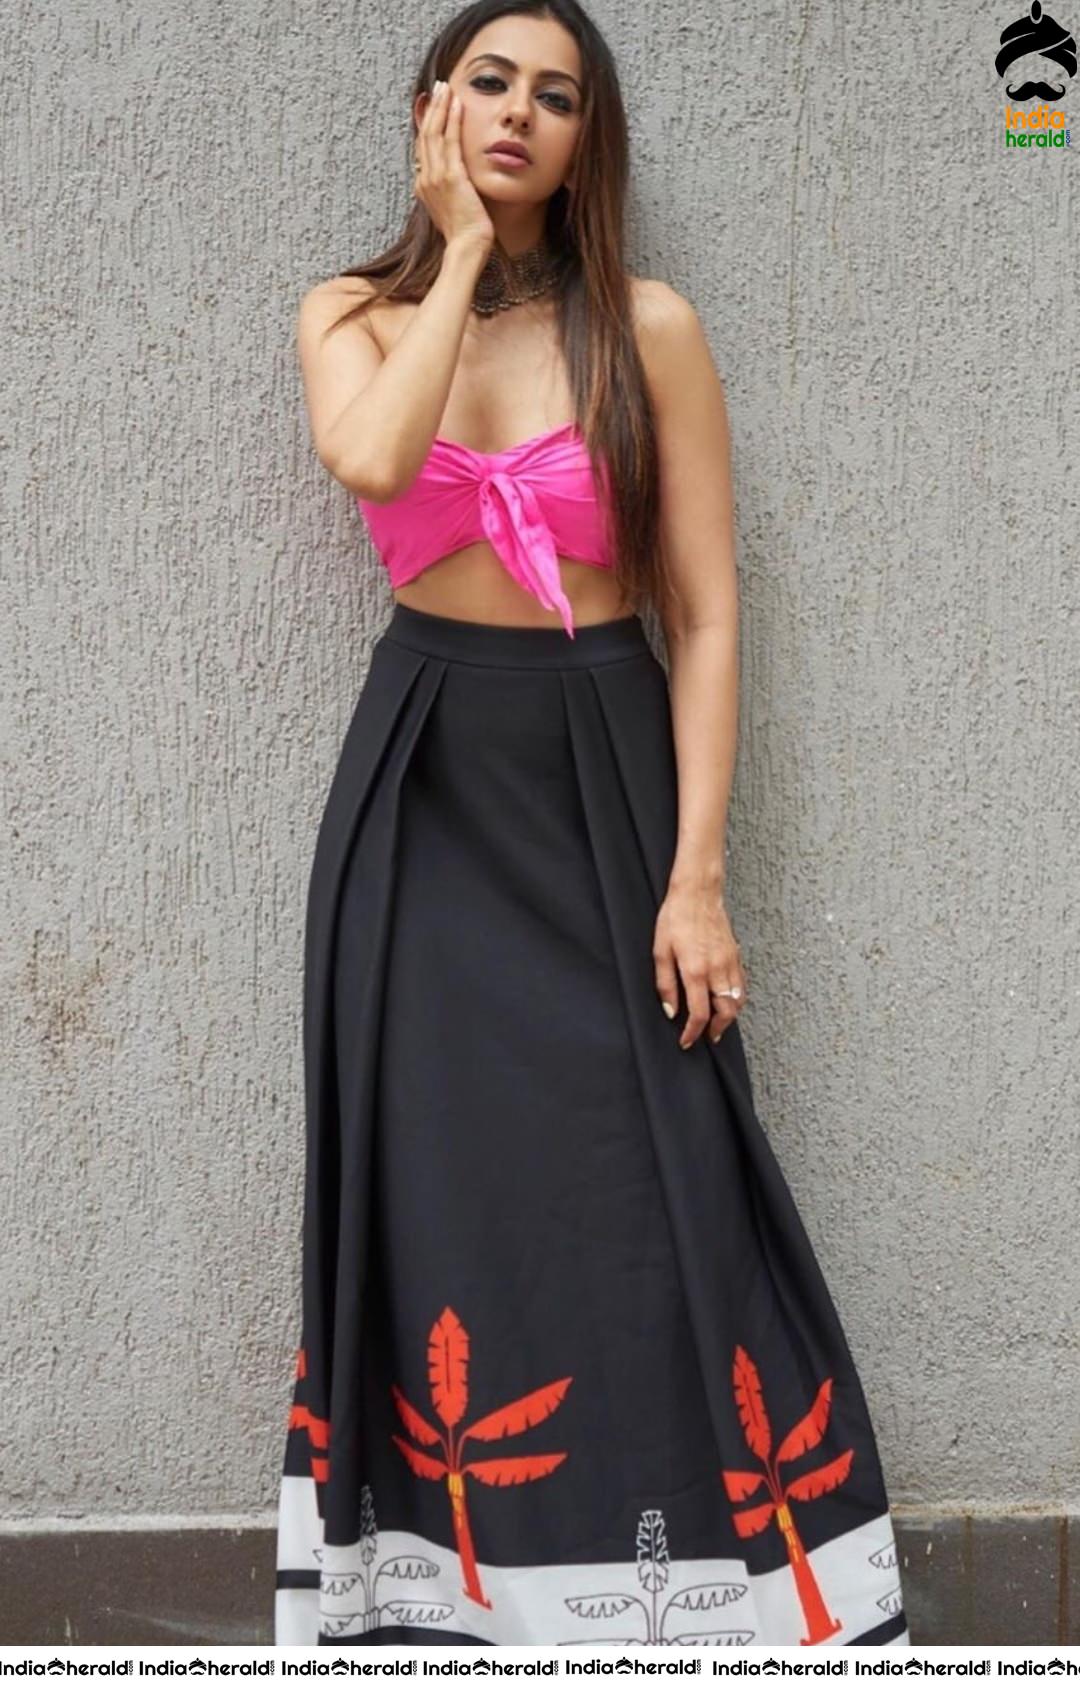 Rakul Preet Caught in Pink Bra and Exposing her Sexy Assets